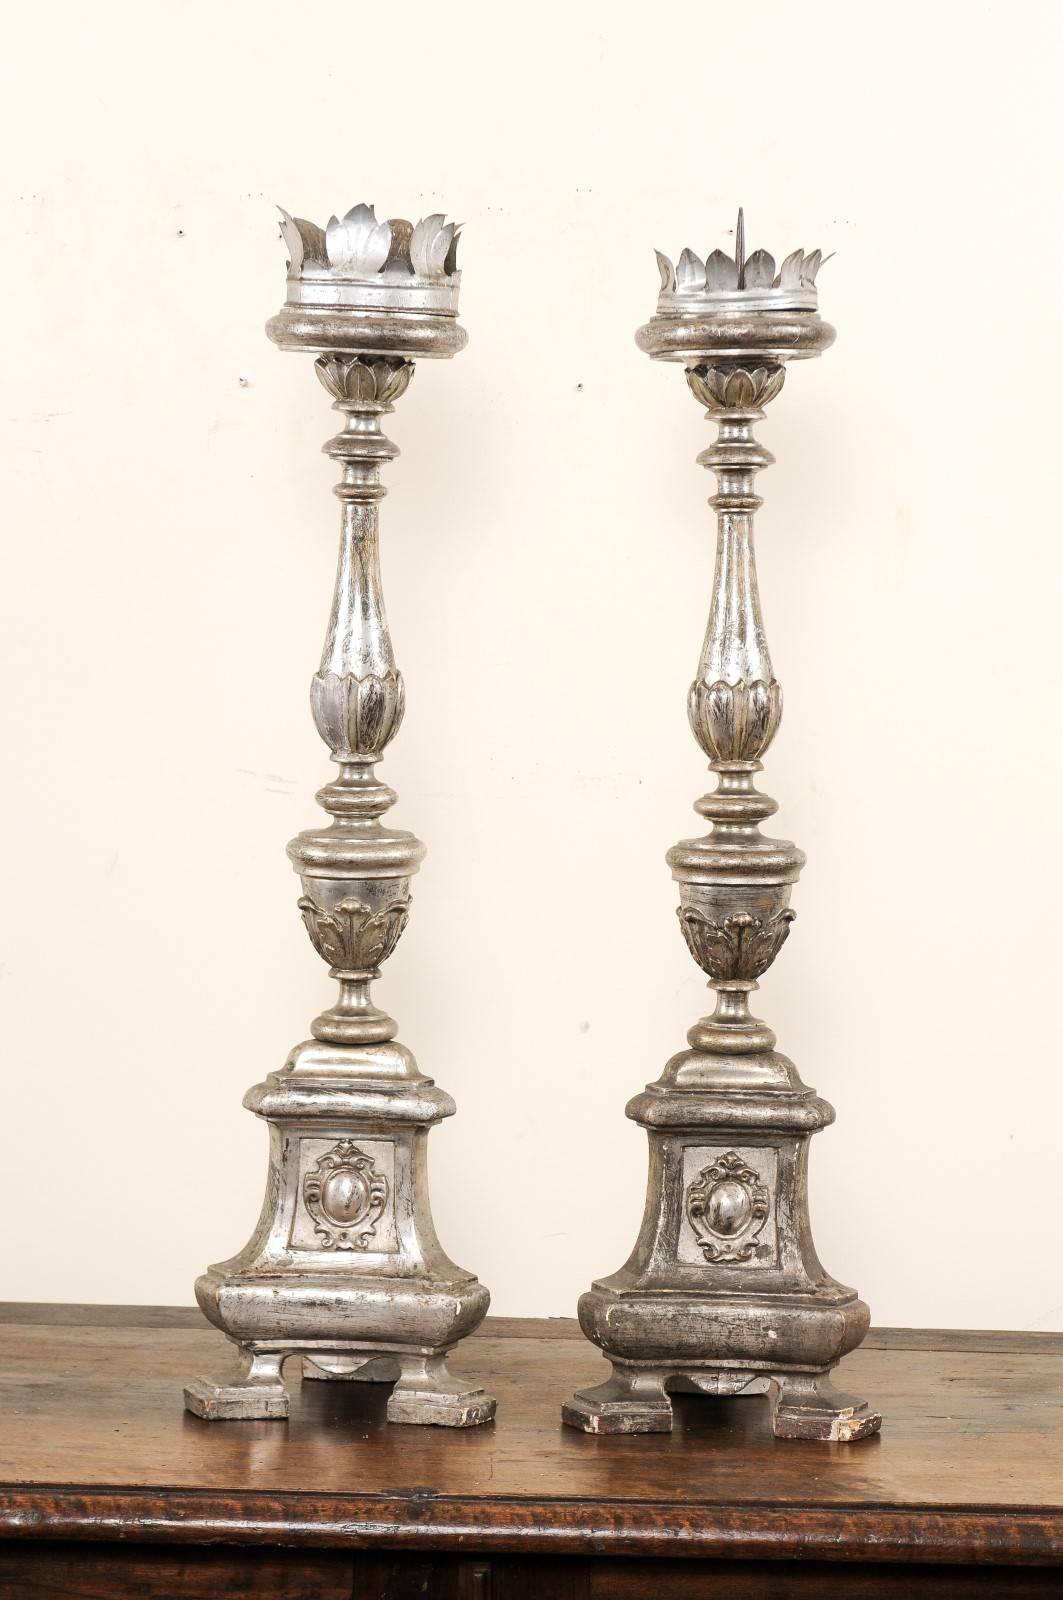 A pair of large-sized 19th century Italian candlesticks. This pair of antique candlesticks, circa 1850, were originally displayed in an Italian church and feature silver gilt over exquisite hand-carved wood bodies. Each candlestick is approximately